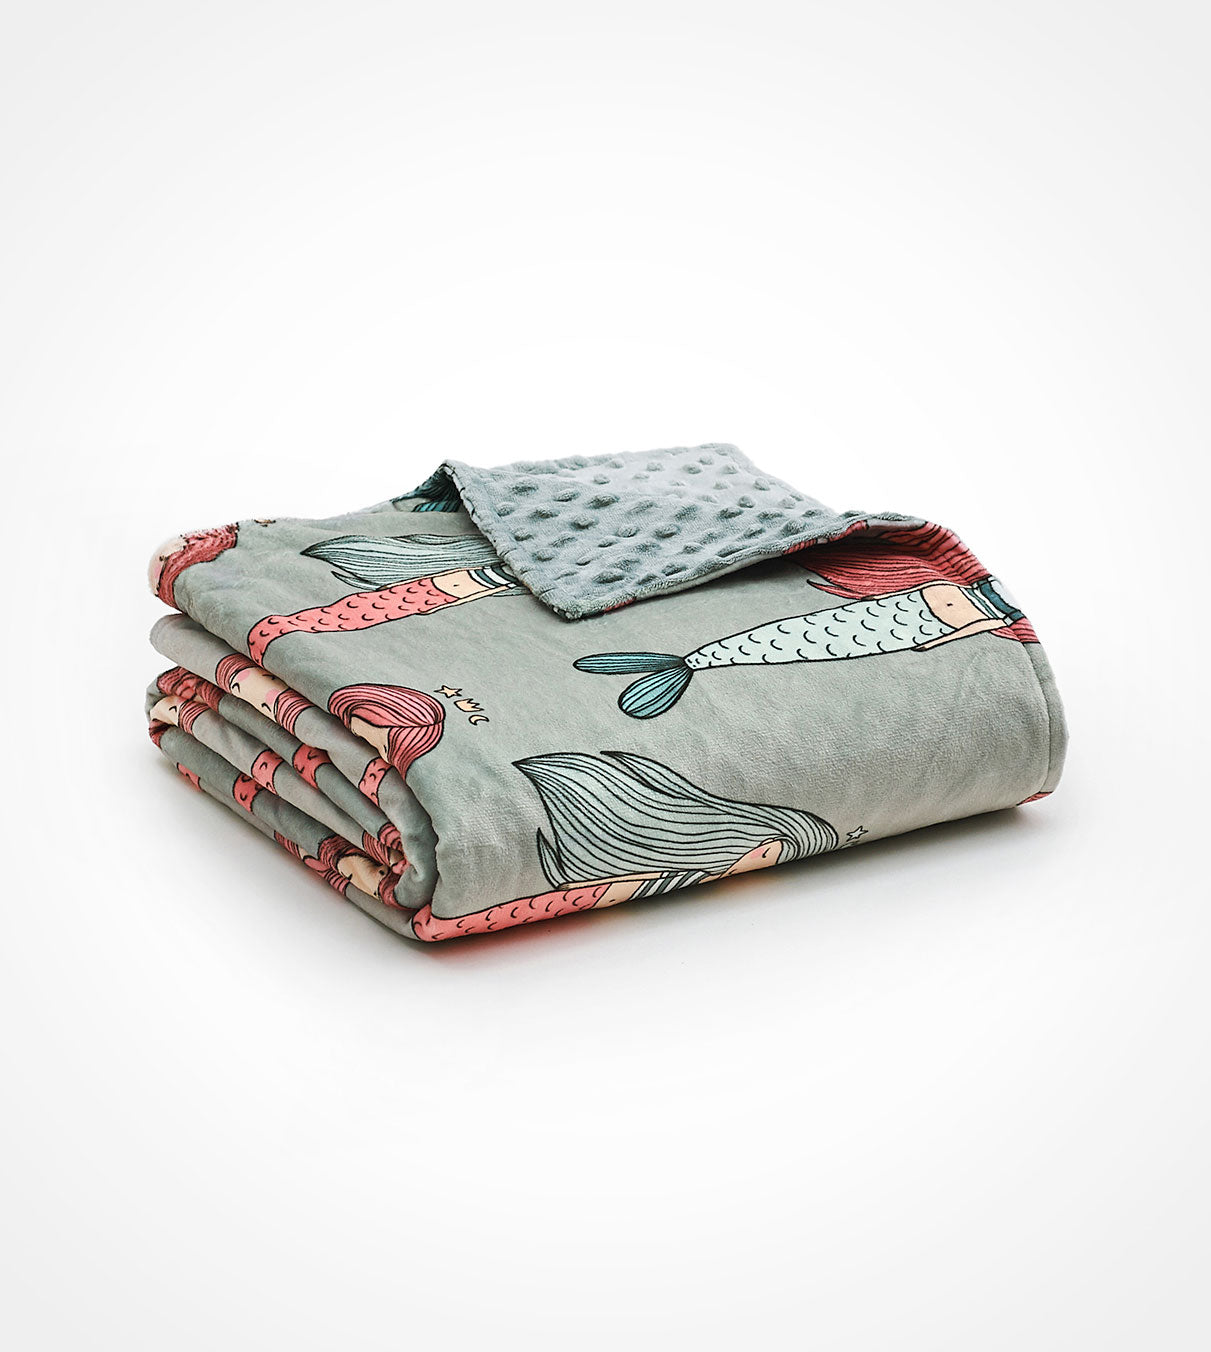 Product: Soft Weighted Blanket Duvet Cover | Color: Mermaid Print